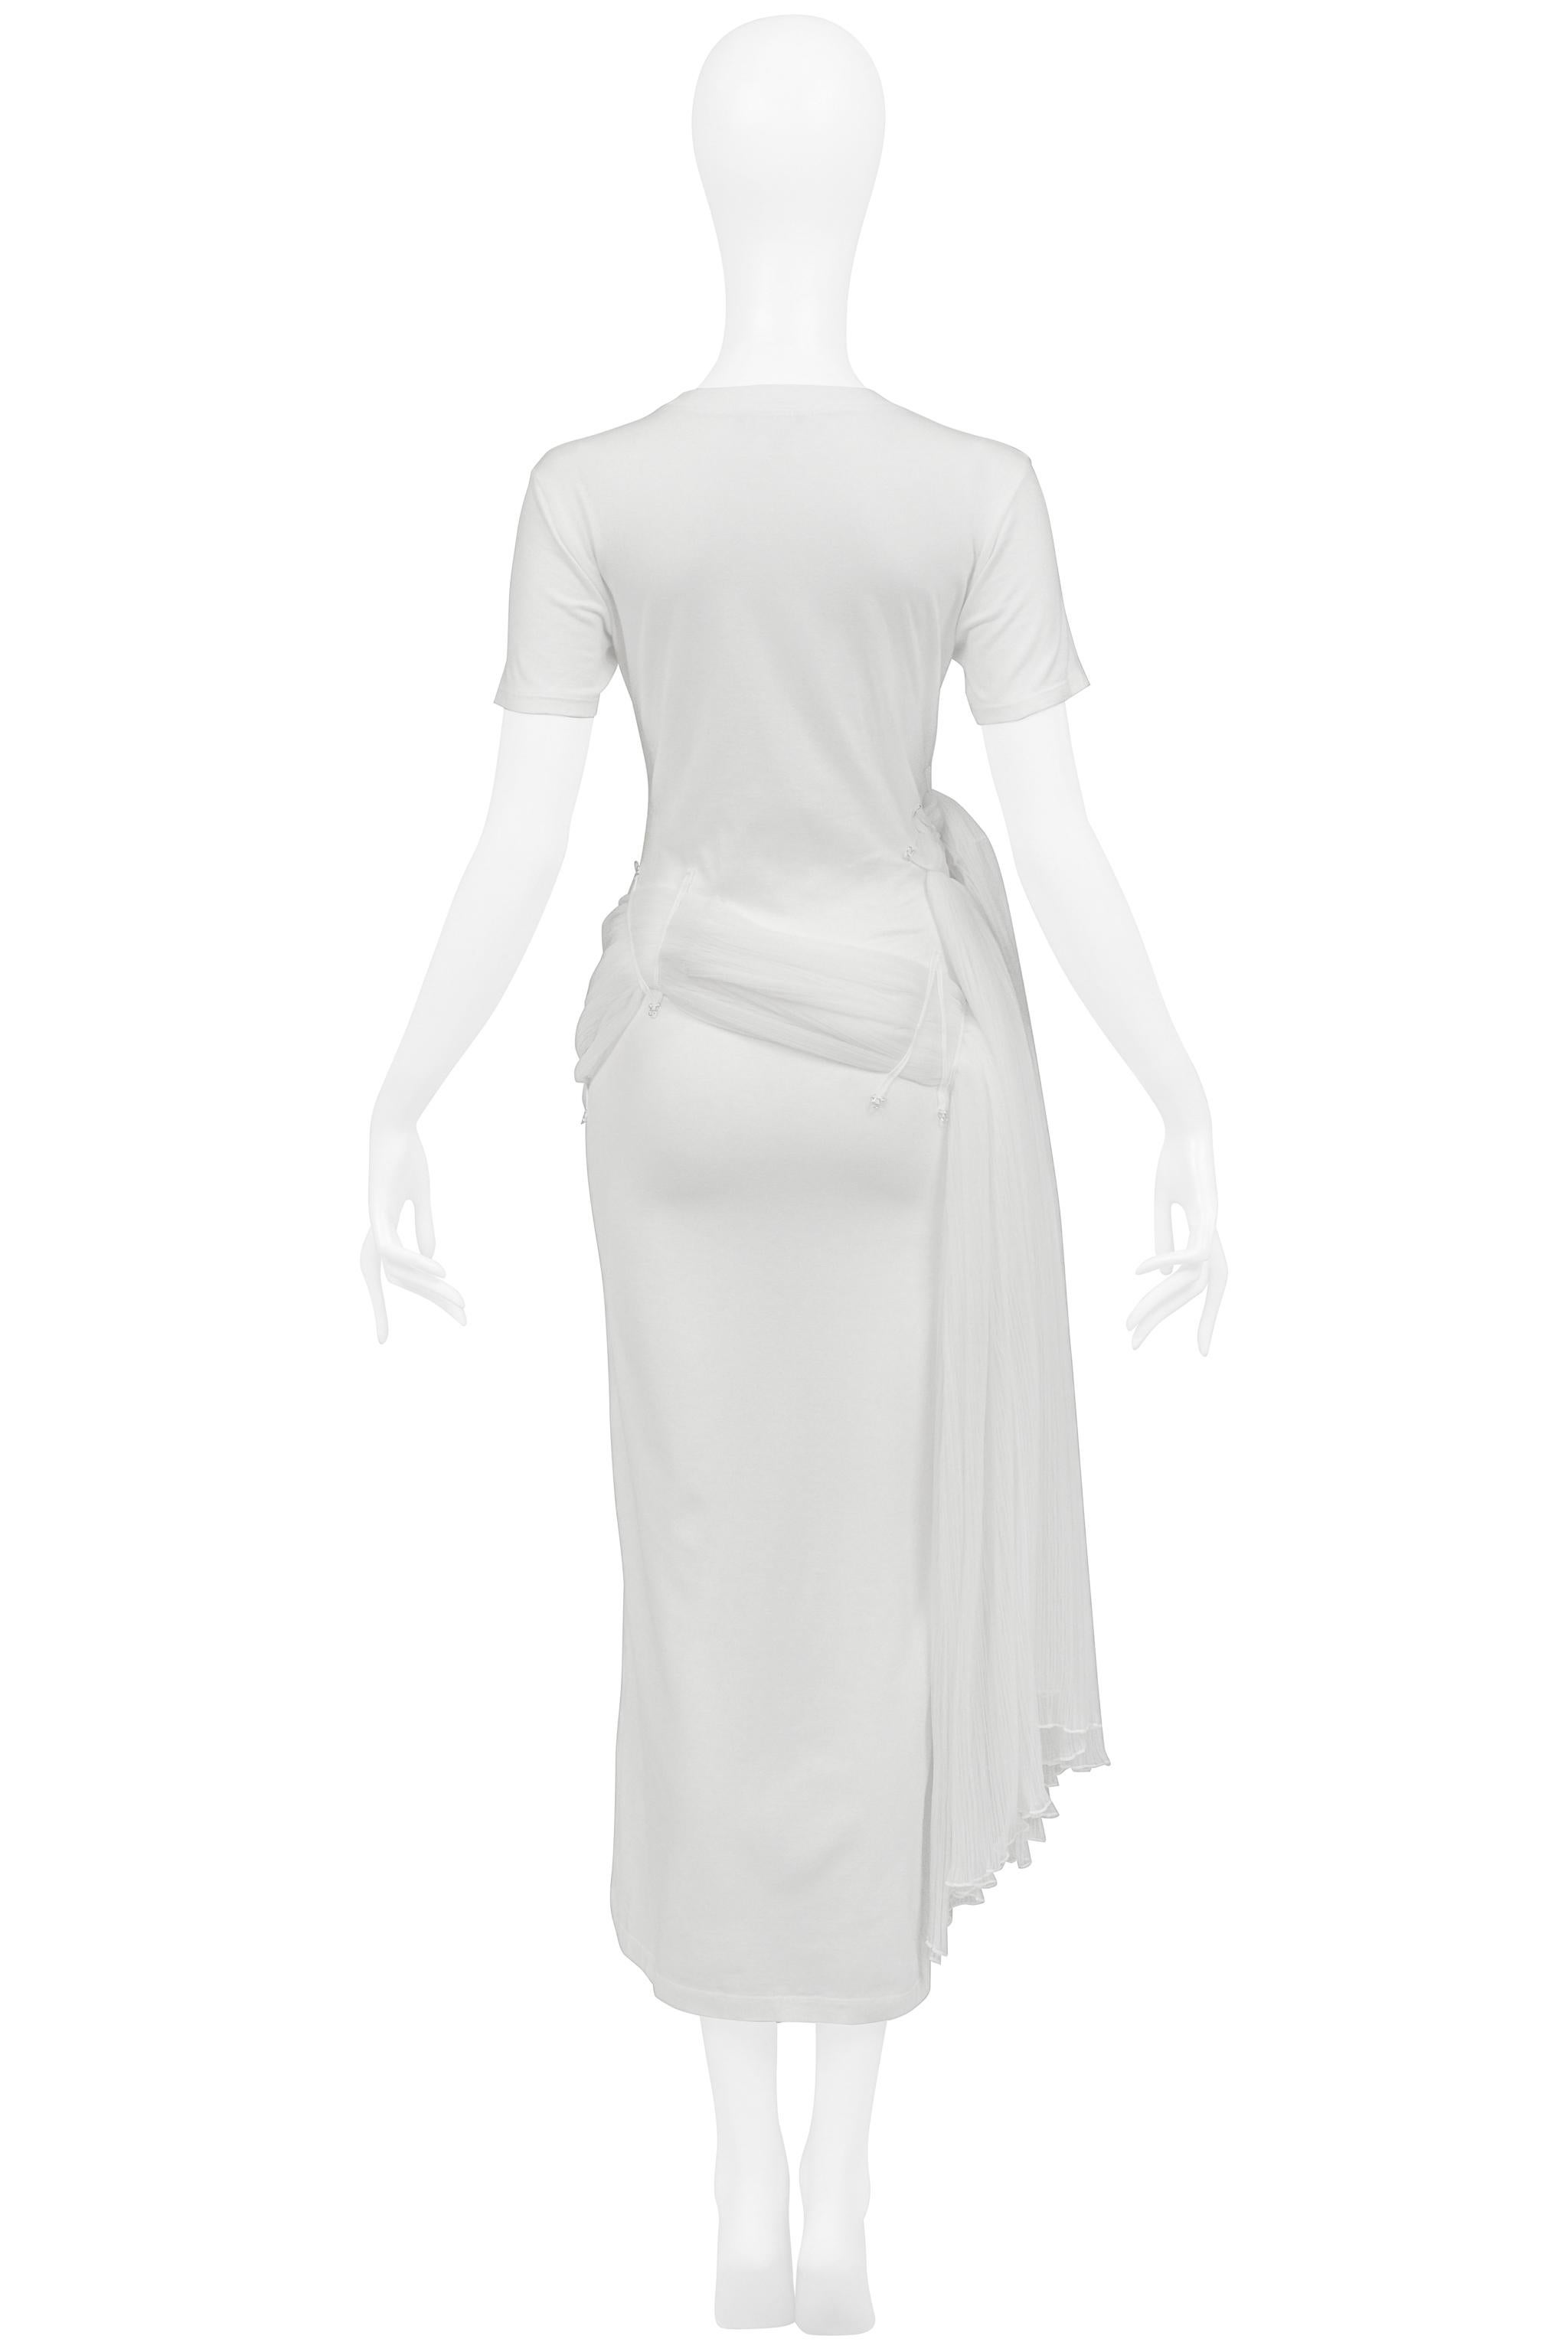 Issey Miyake Iconic White Goddess Concept Dress 2003 For Sale 7